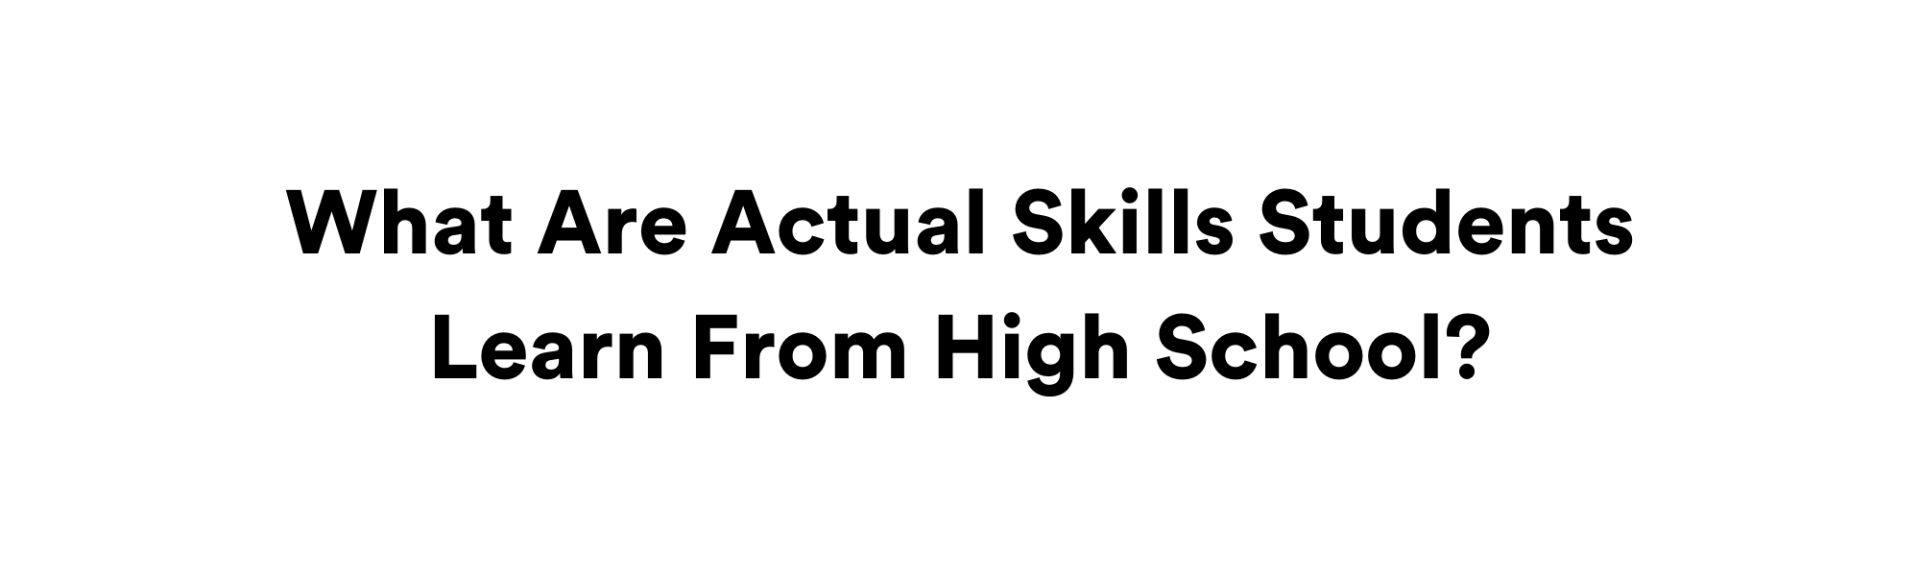 What Are Actual Skills Students Learn From High School?